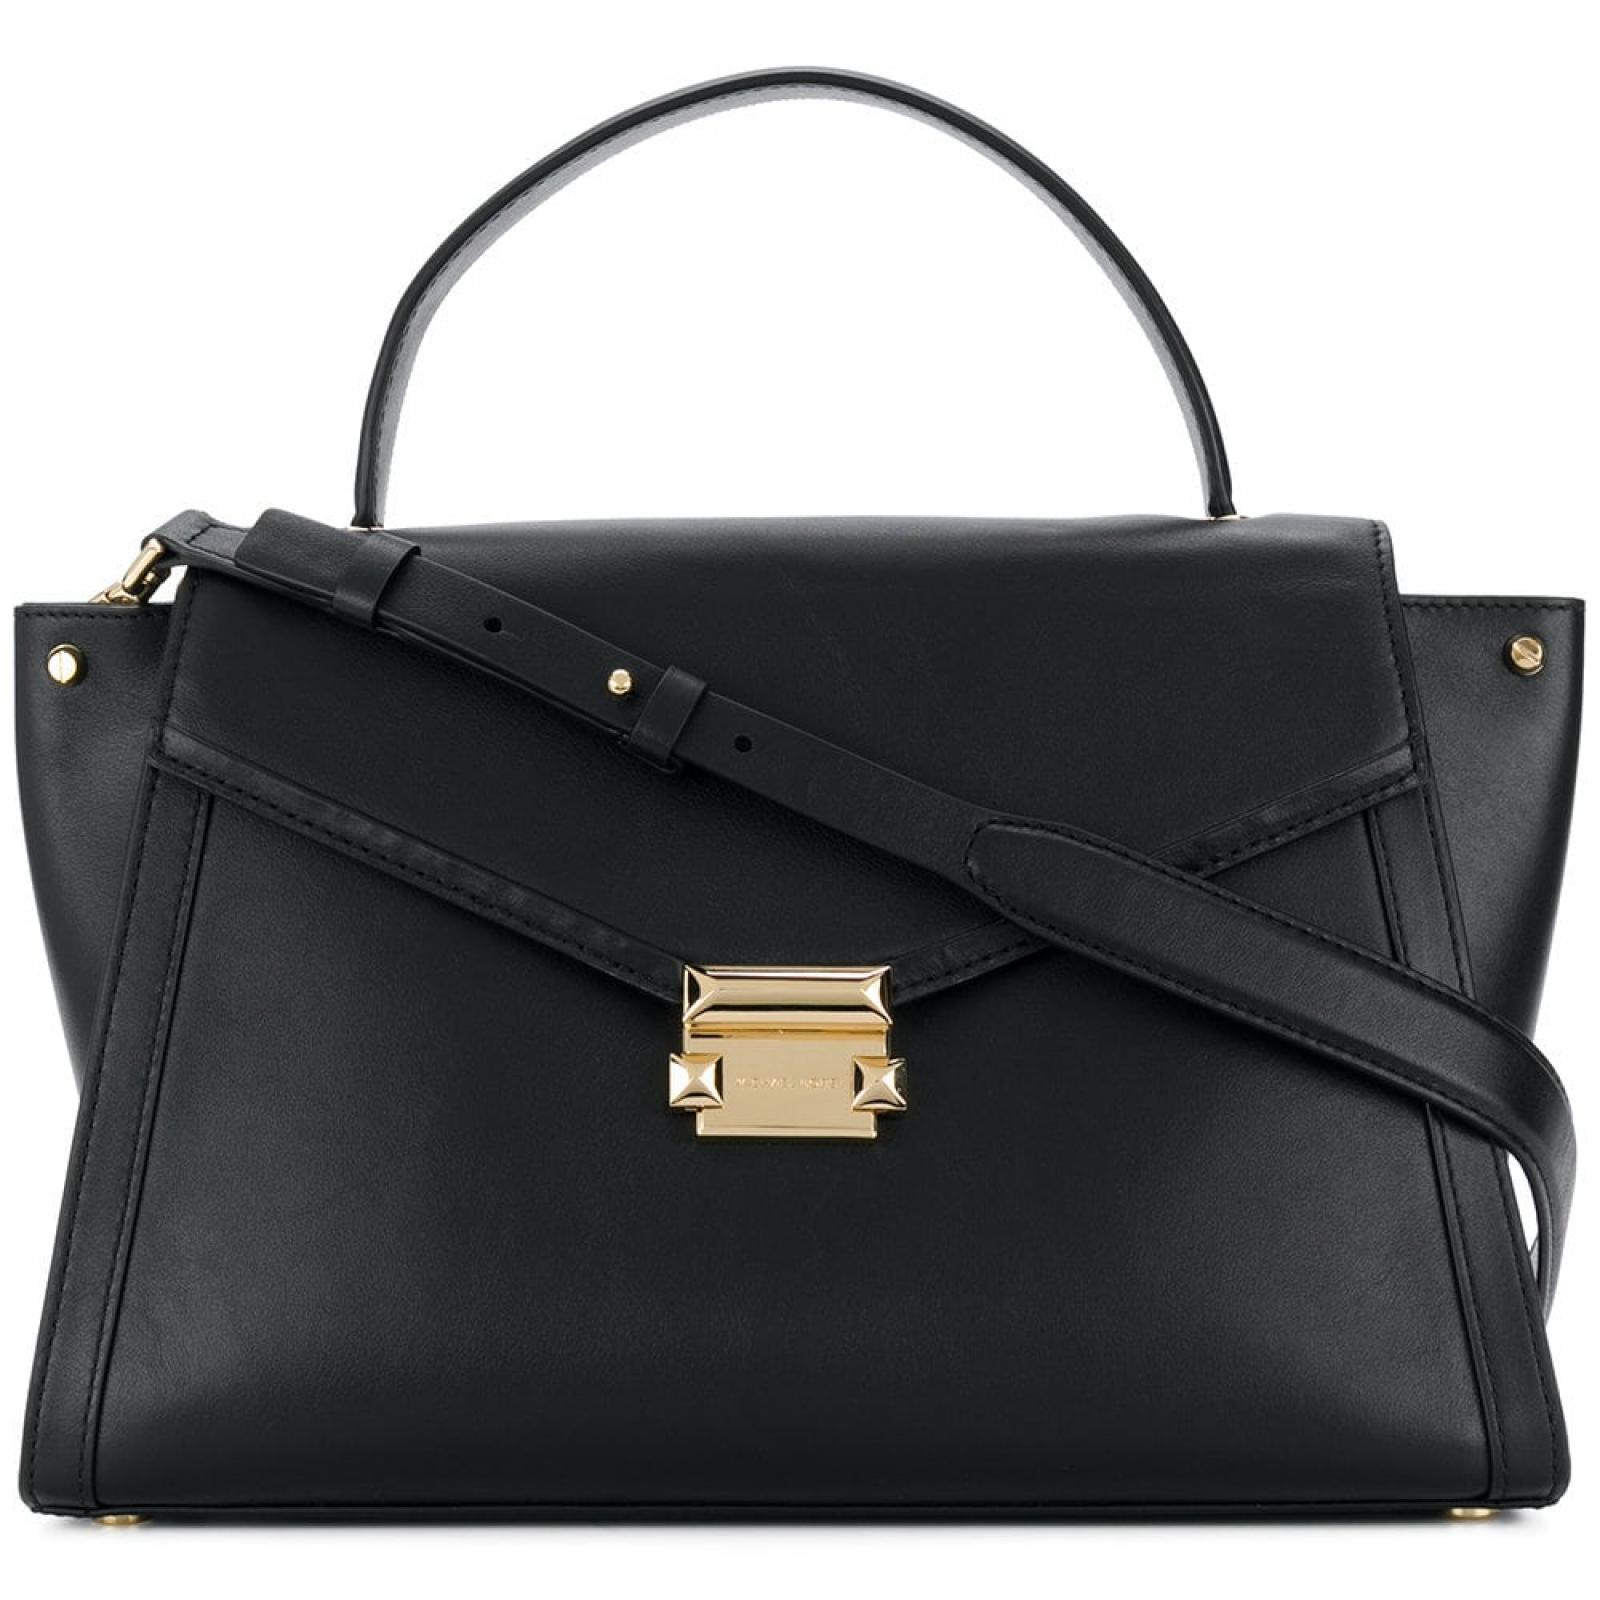 Michael Kors Whitney Large Satchel in leather - 1